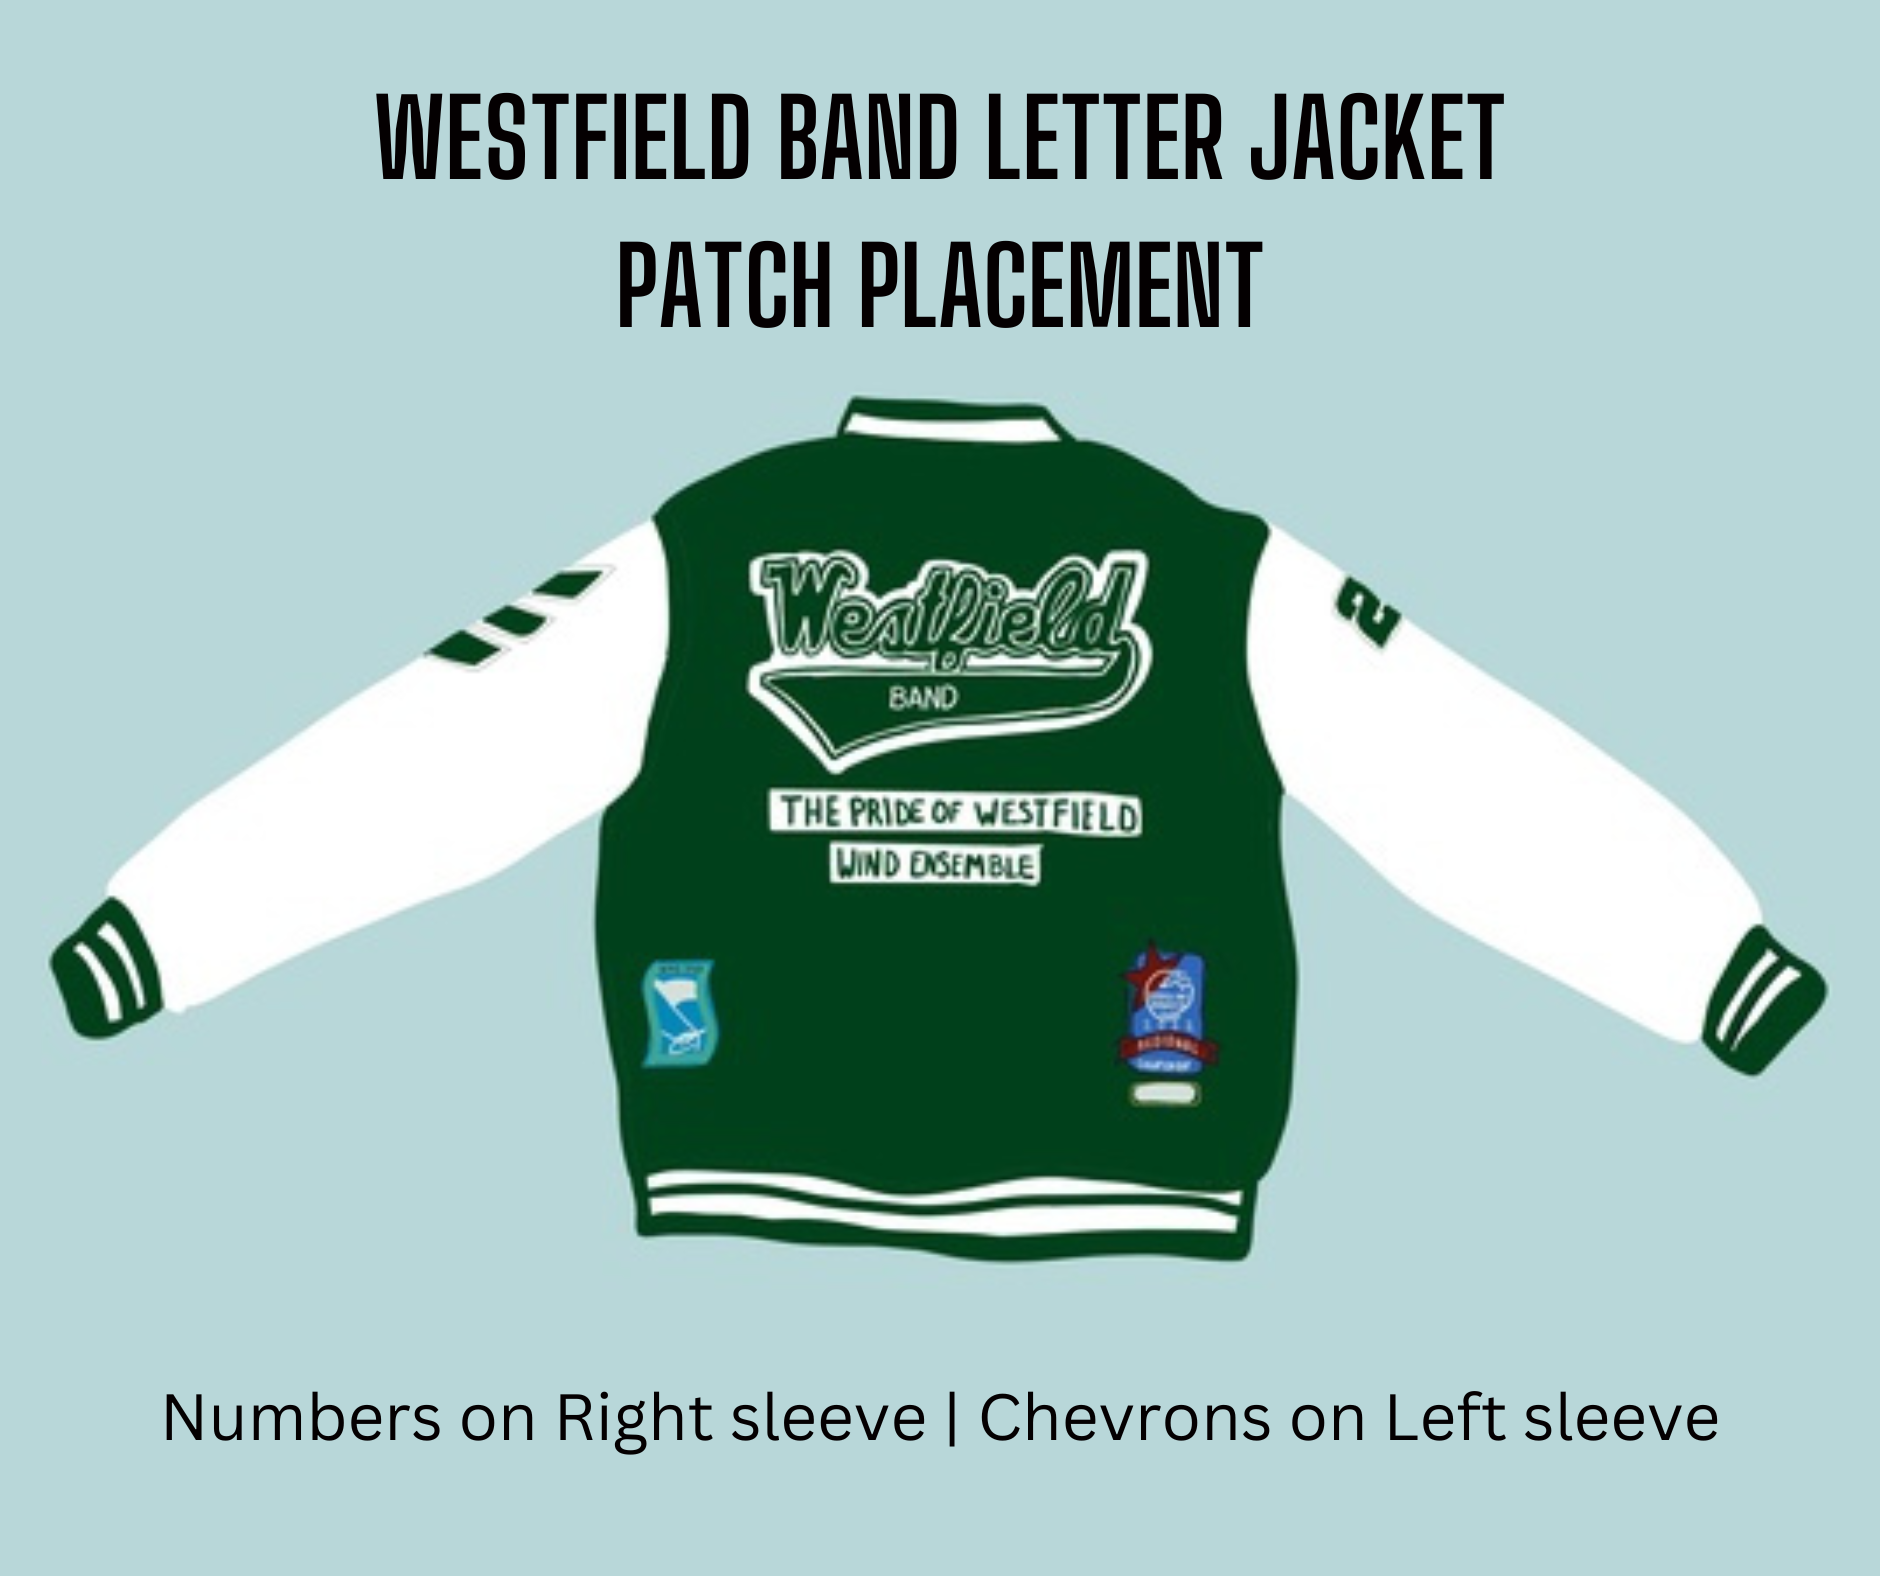 Westfield Marching Band Jacket